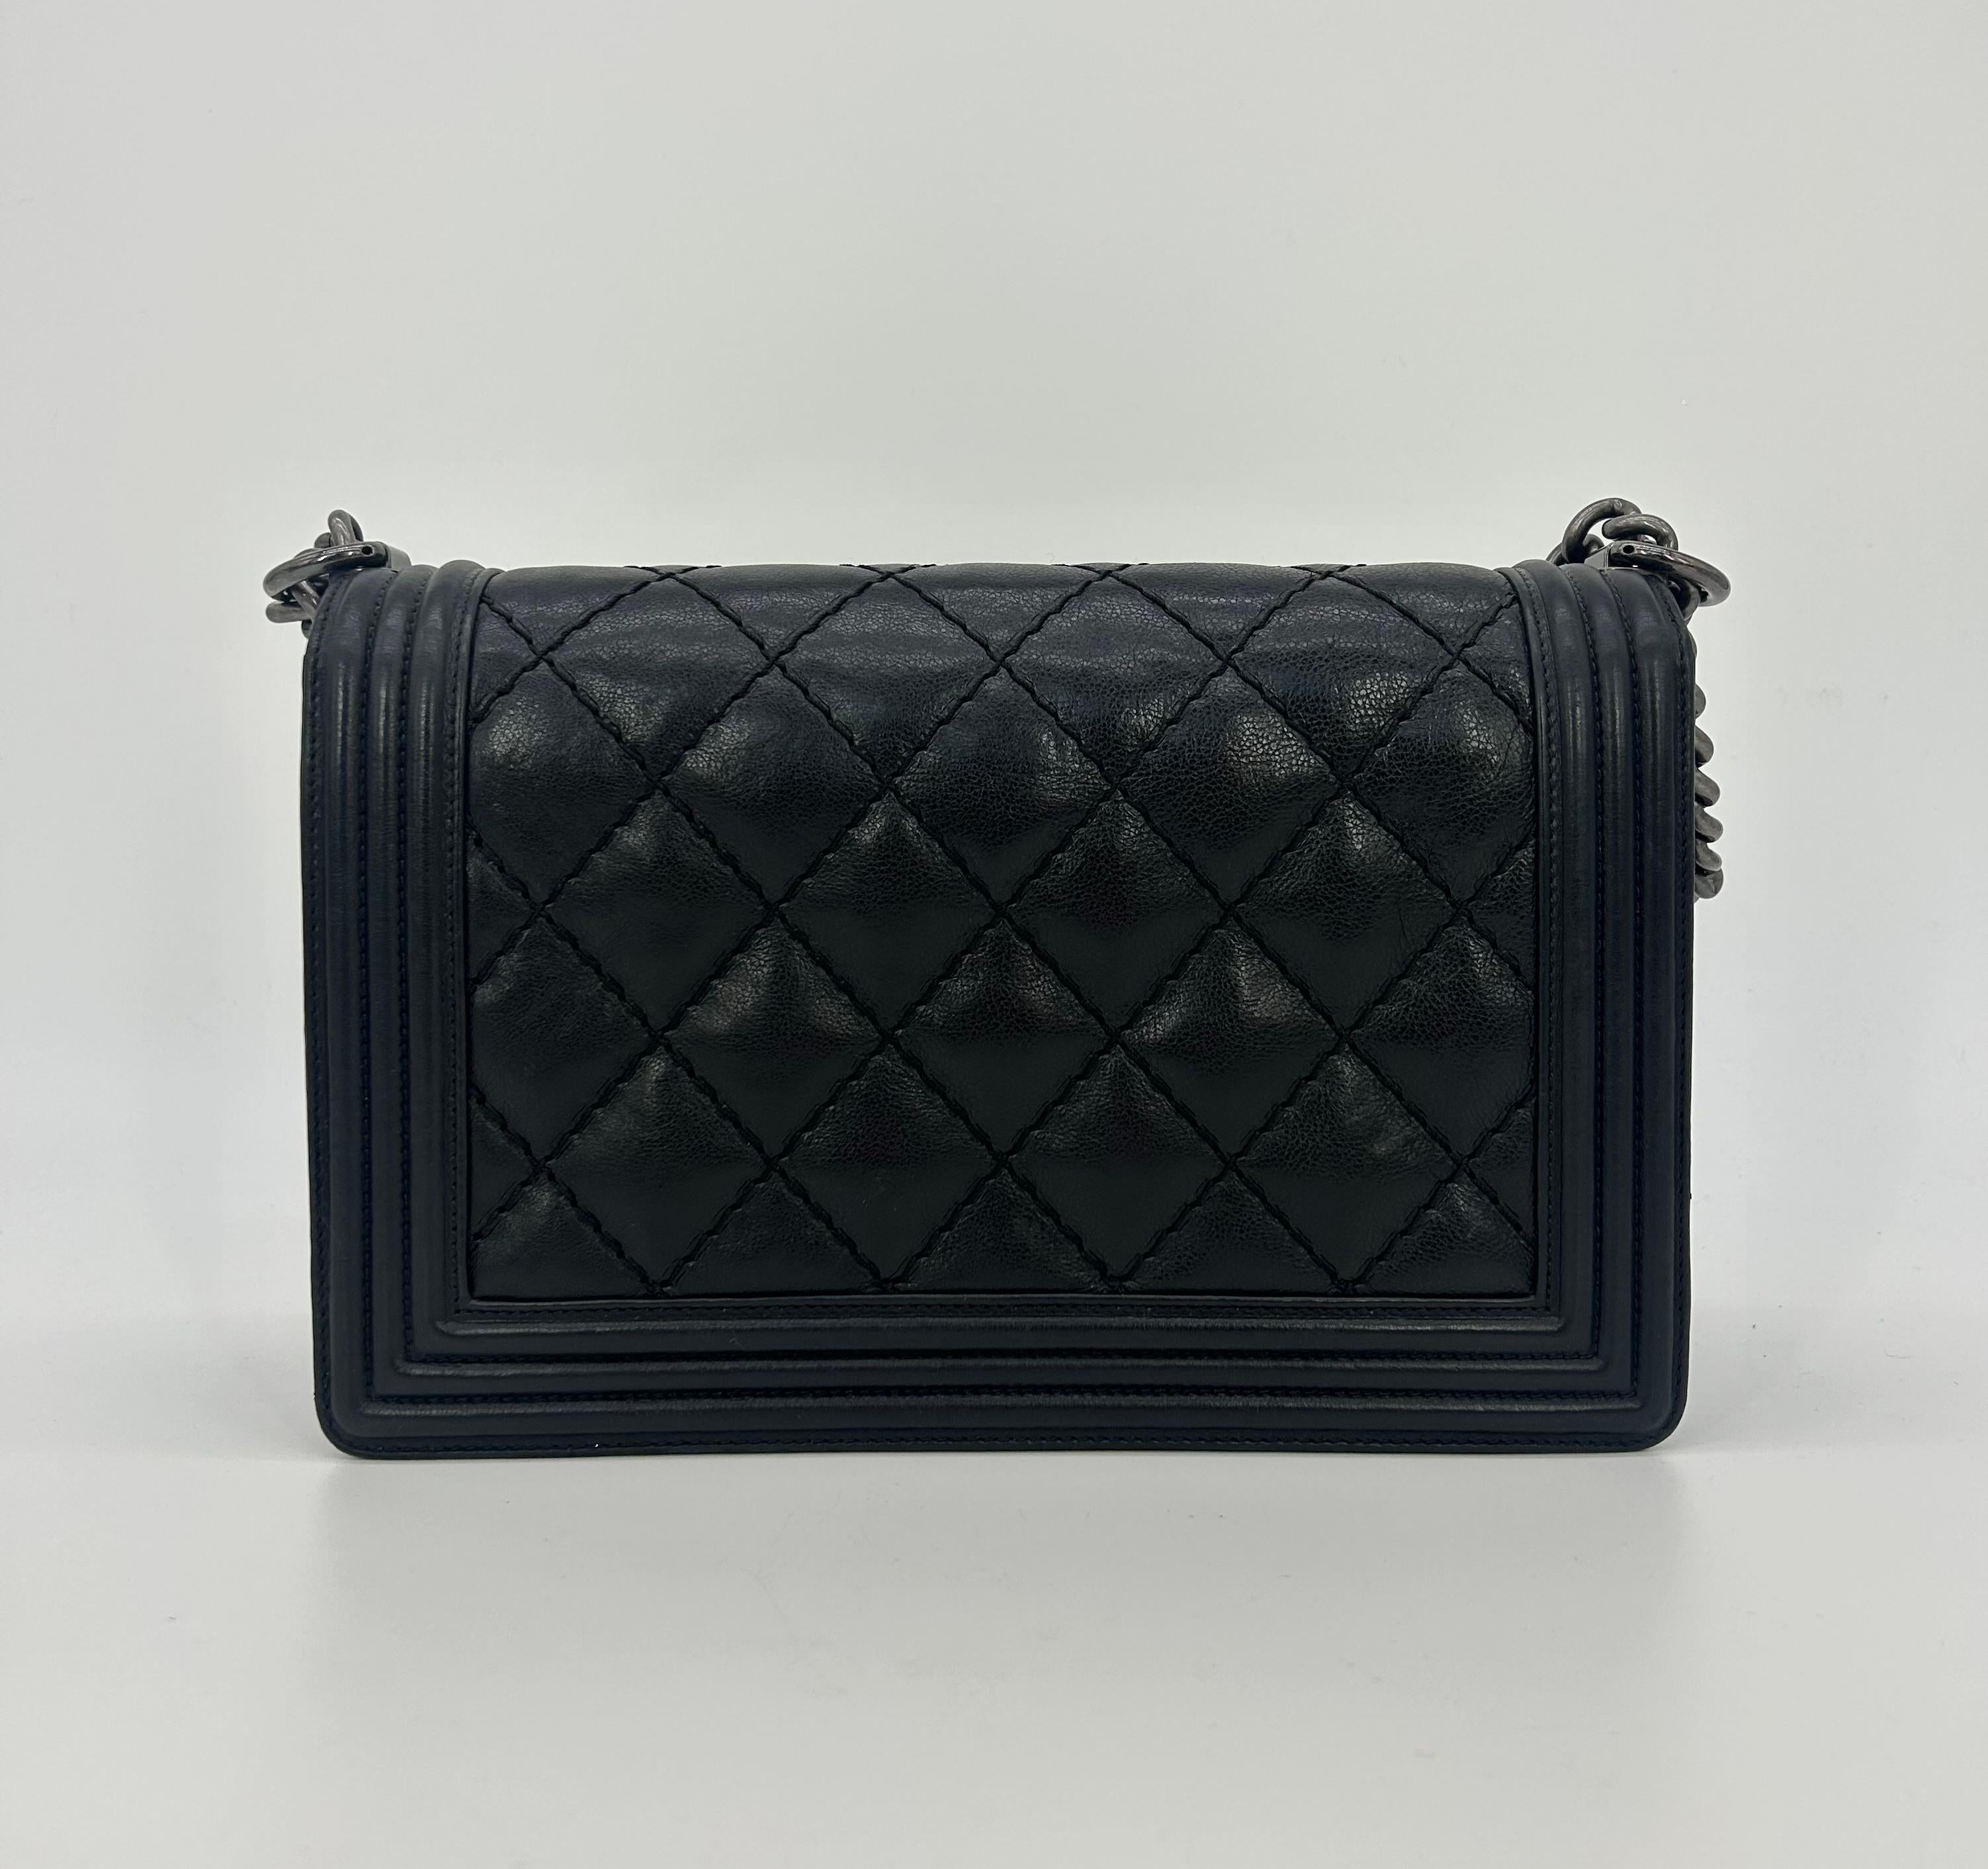 Chanel Black Lambskin Quilted Medium Boy Bag In Good Condition For Sale In Philadelphia, PA